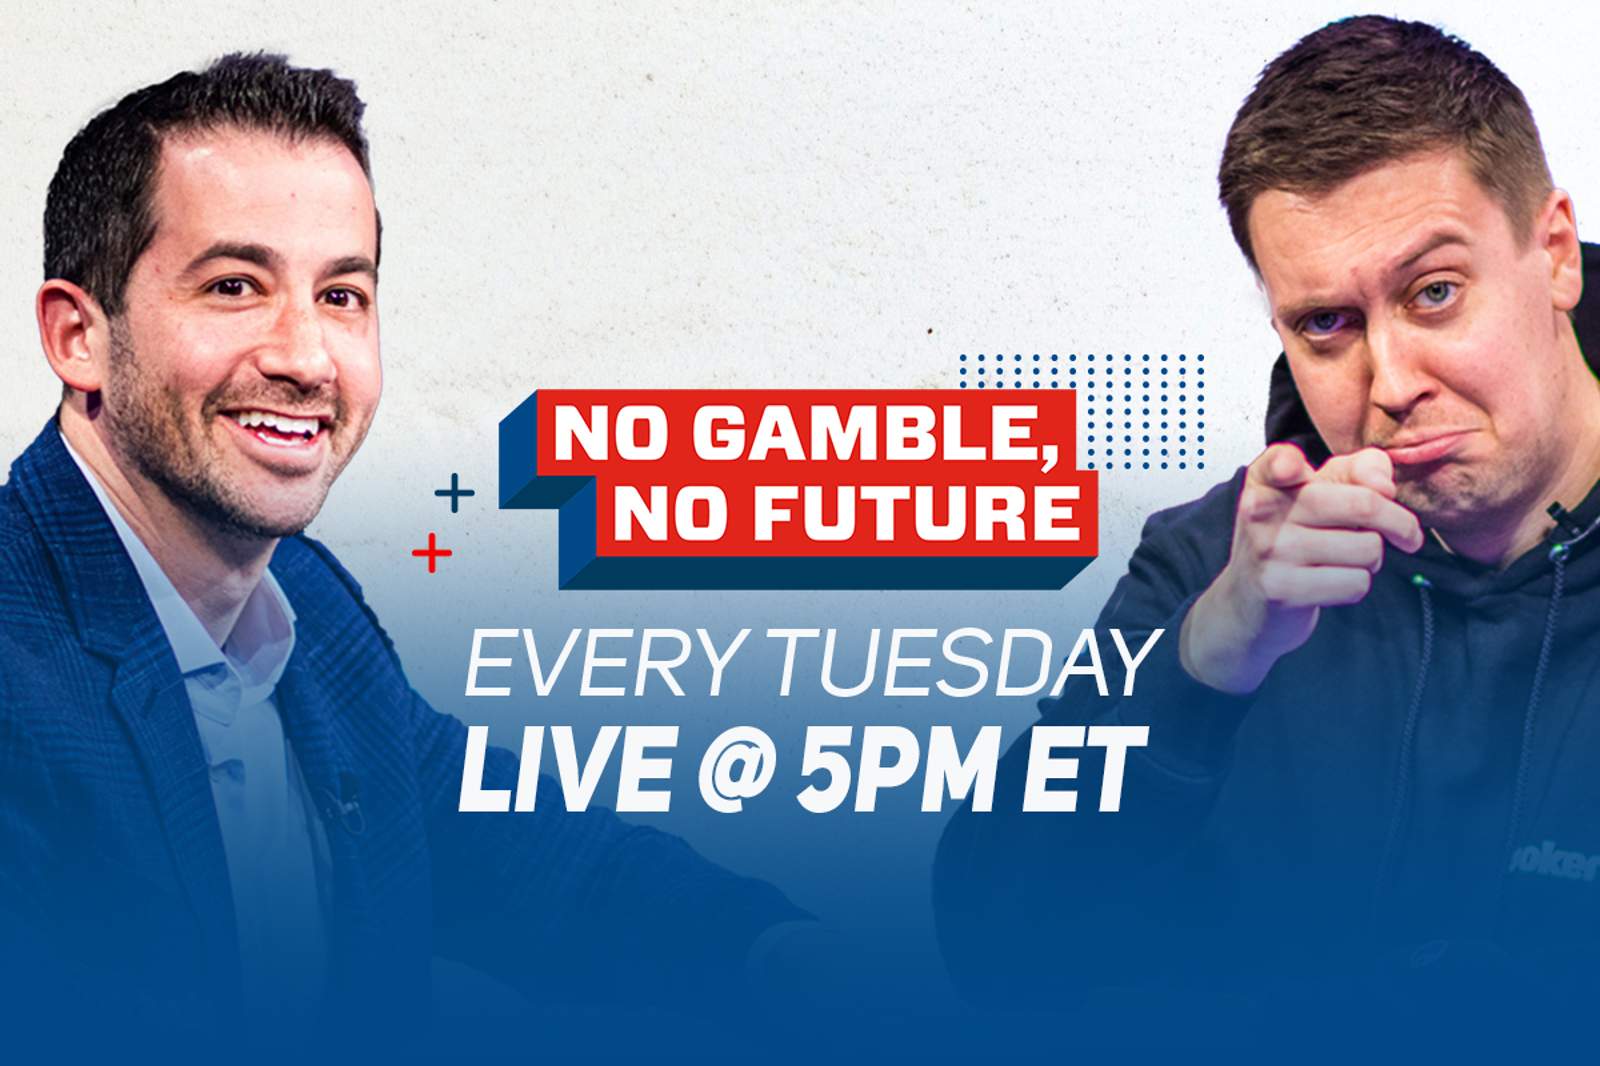 No Gamble, No Future Episode 9 on Today at 5 p.m. ET with Barstool's Ben Mintz